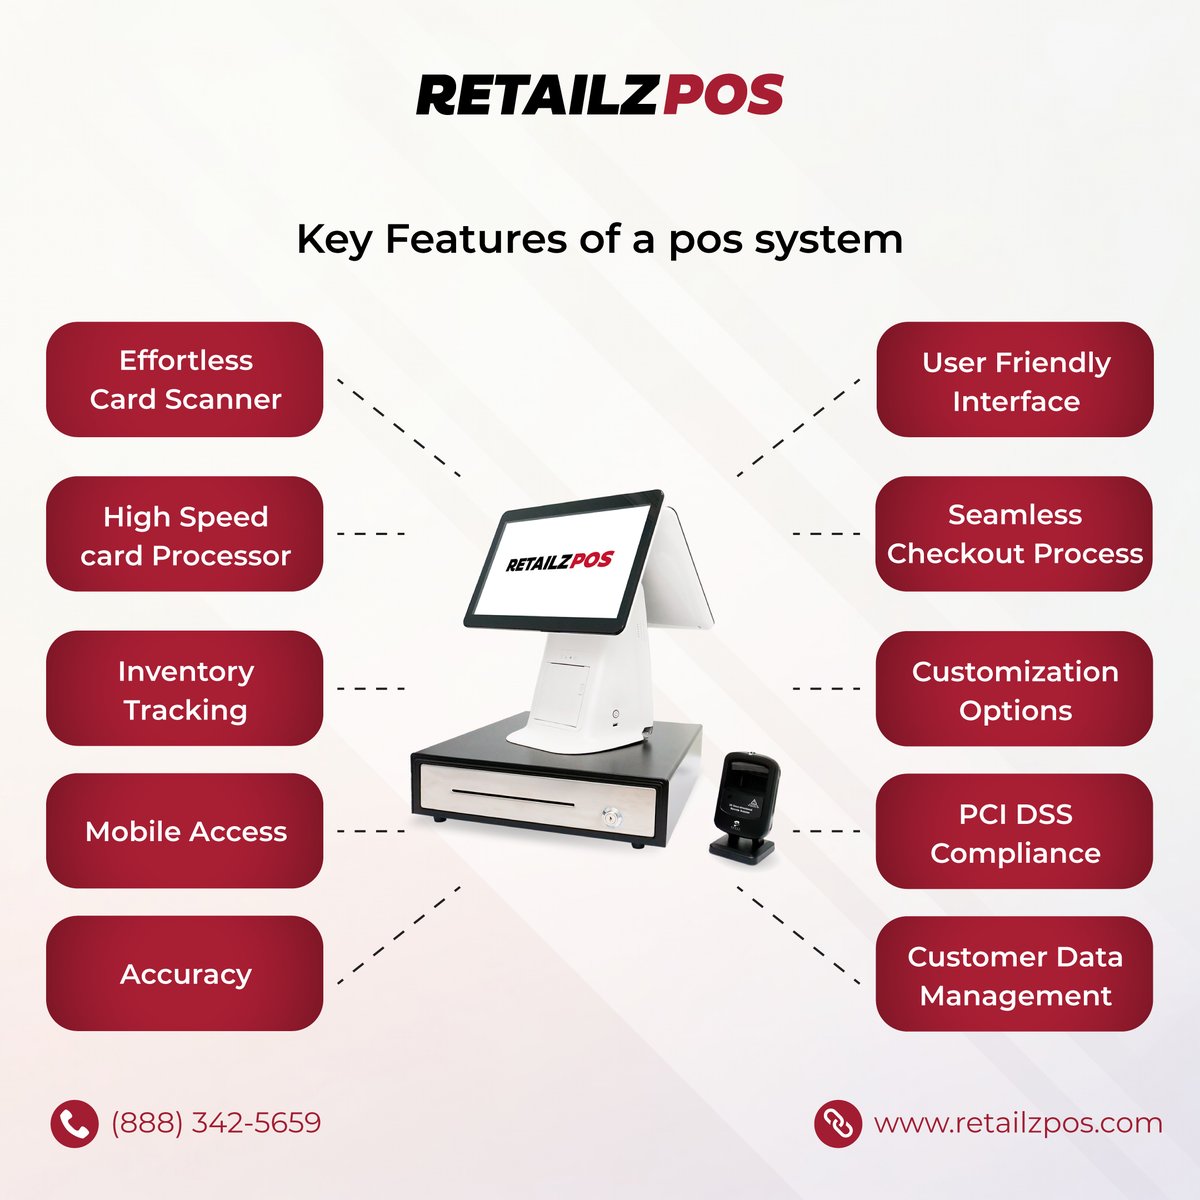 Step into the future of retail with cloud-hosted POS solutions! Automatic data backup, boosted visibility, and mobility redefines how you run your business. Join the trend- 52% of corporates already benefit, and 40% plan to adopt cloud-based POS systems. #RetailTech #CloudPOS